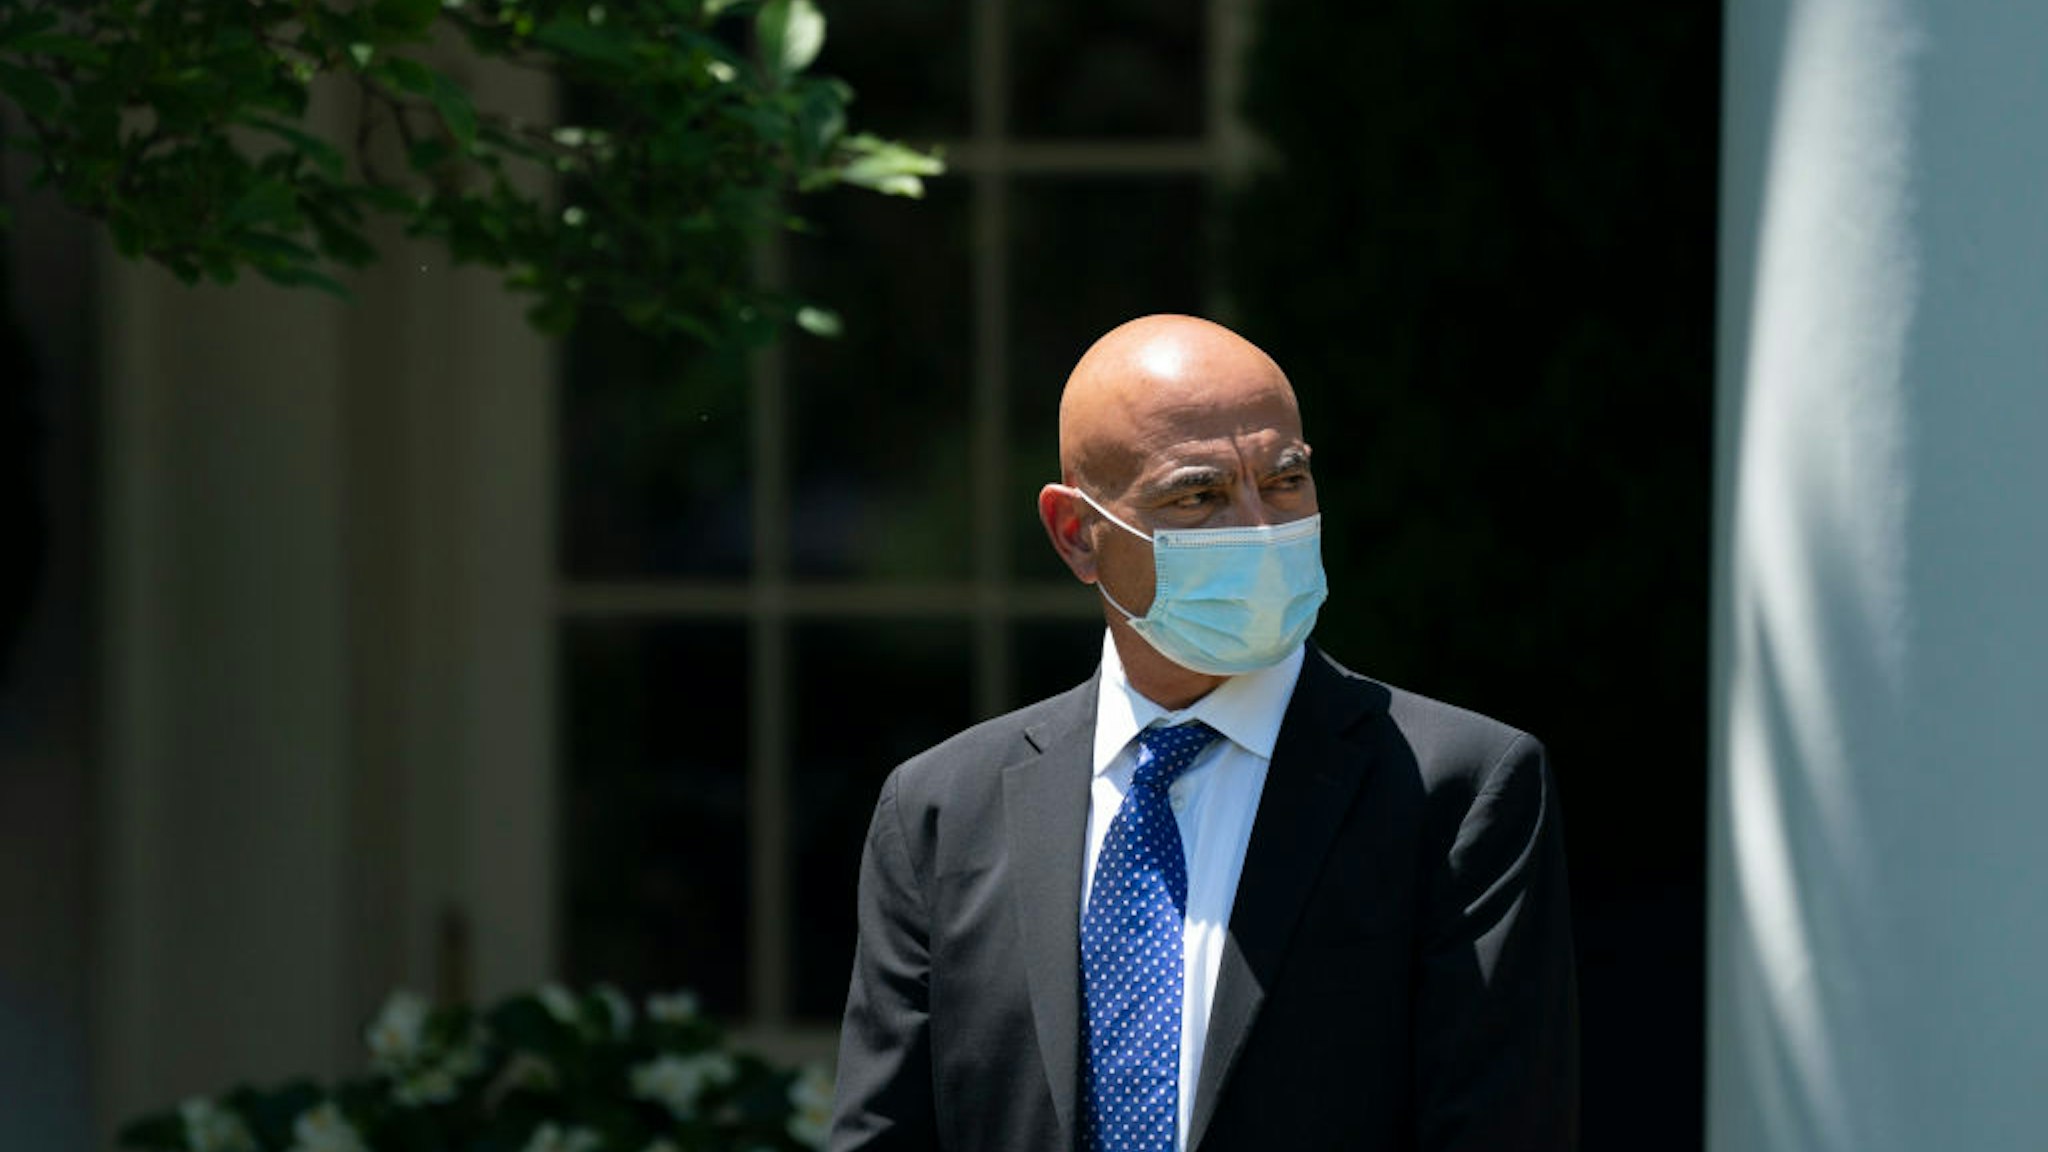 Moncef Slaoui, the former head of GlaxoSmithKlines vaccines division, listens as U.S. President Donald Trump delivers remarks about coronavirus vaccine development in the Rose Garden of the White House on May 15, 2020 in Washington, DC.